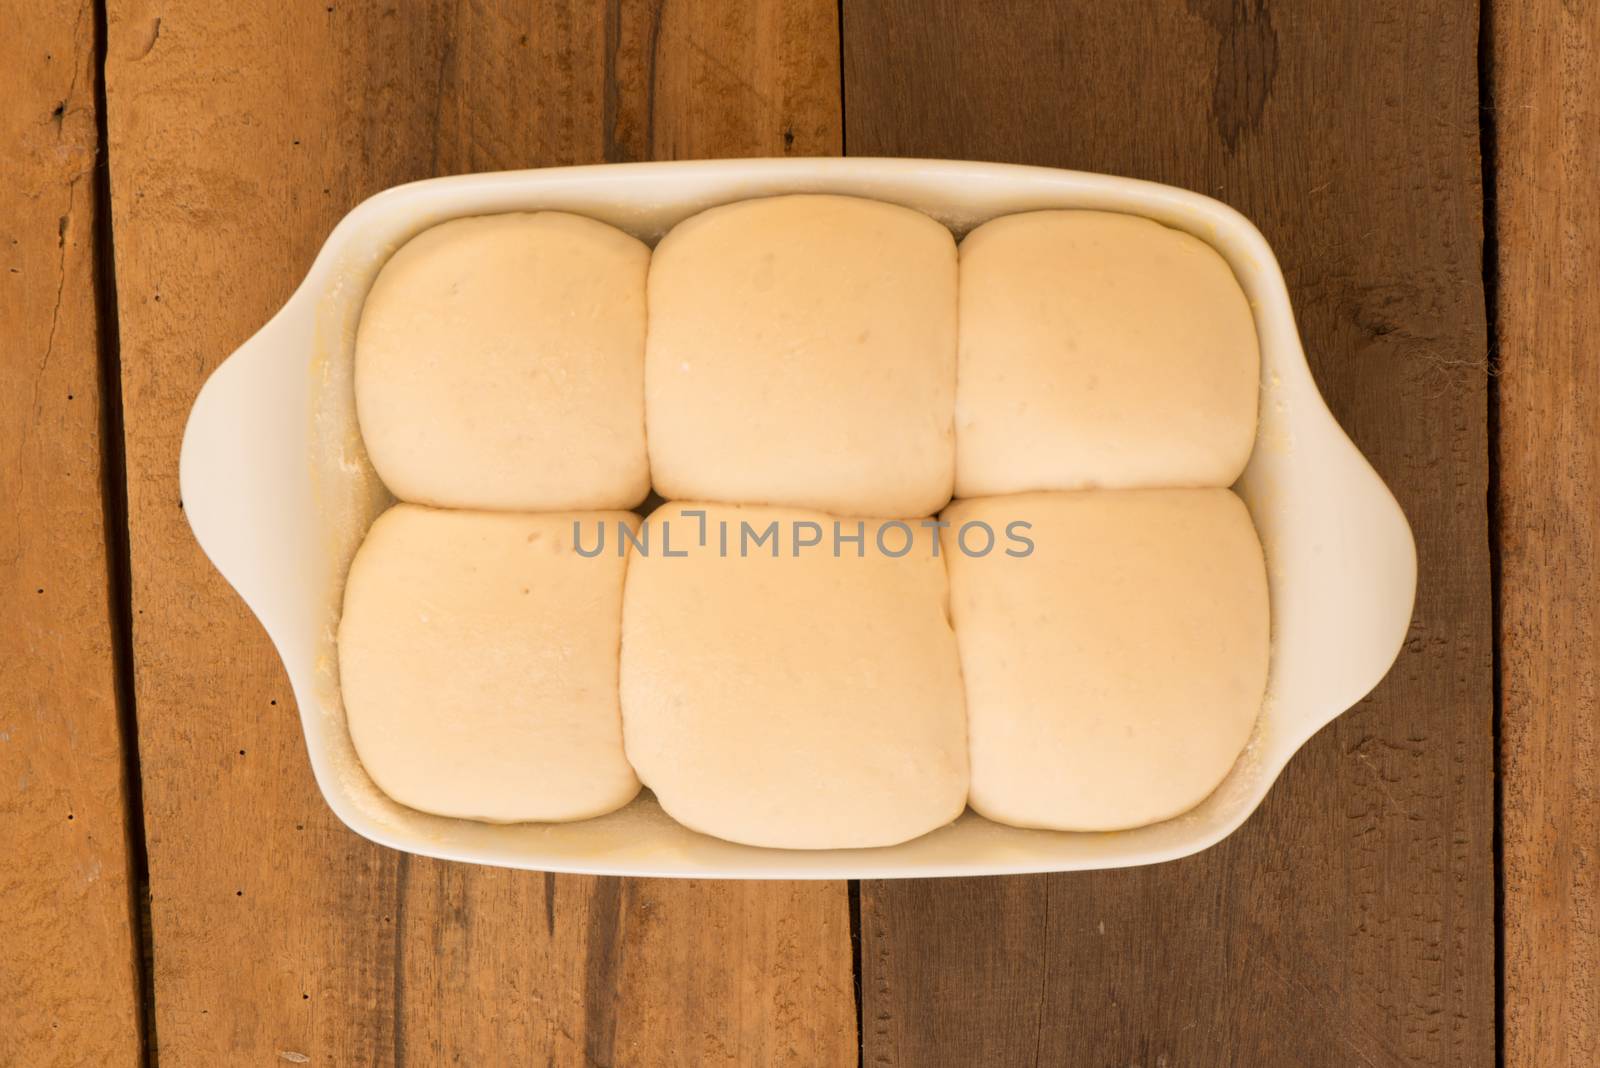 baking dish with yeast dough in the form of an bun